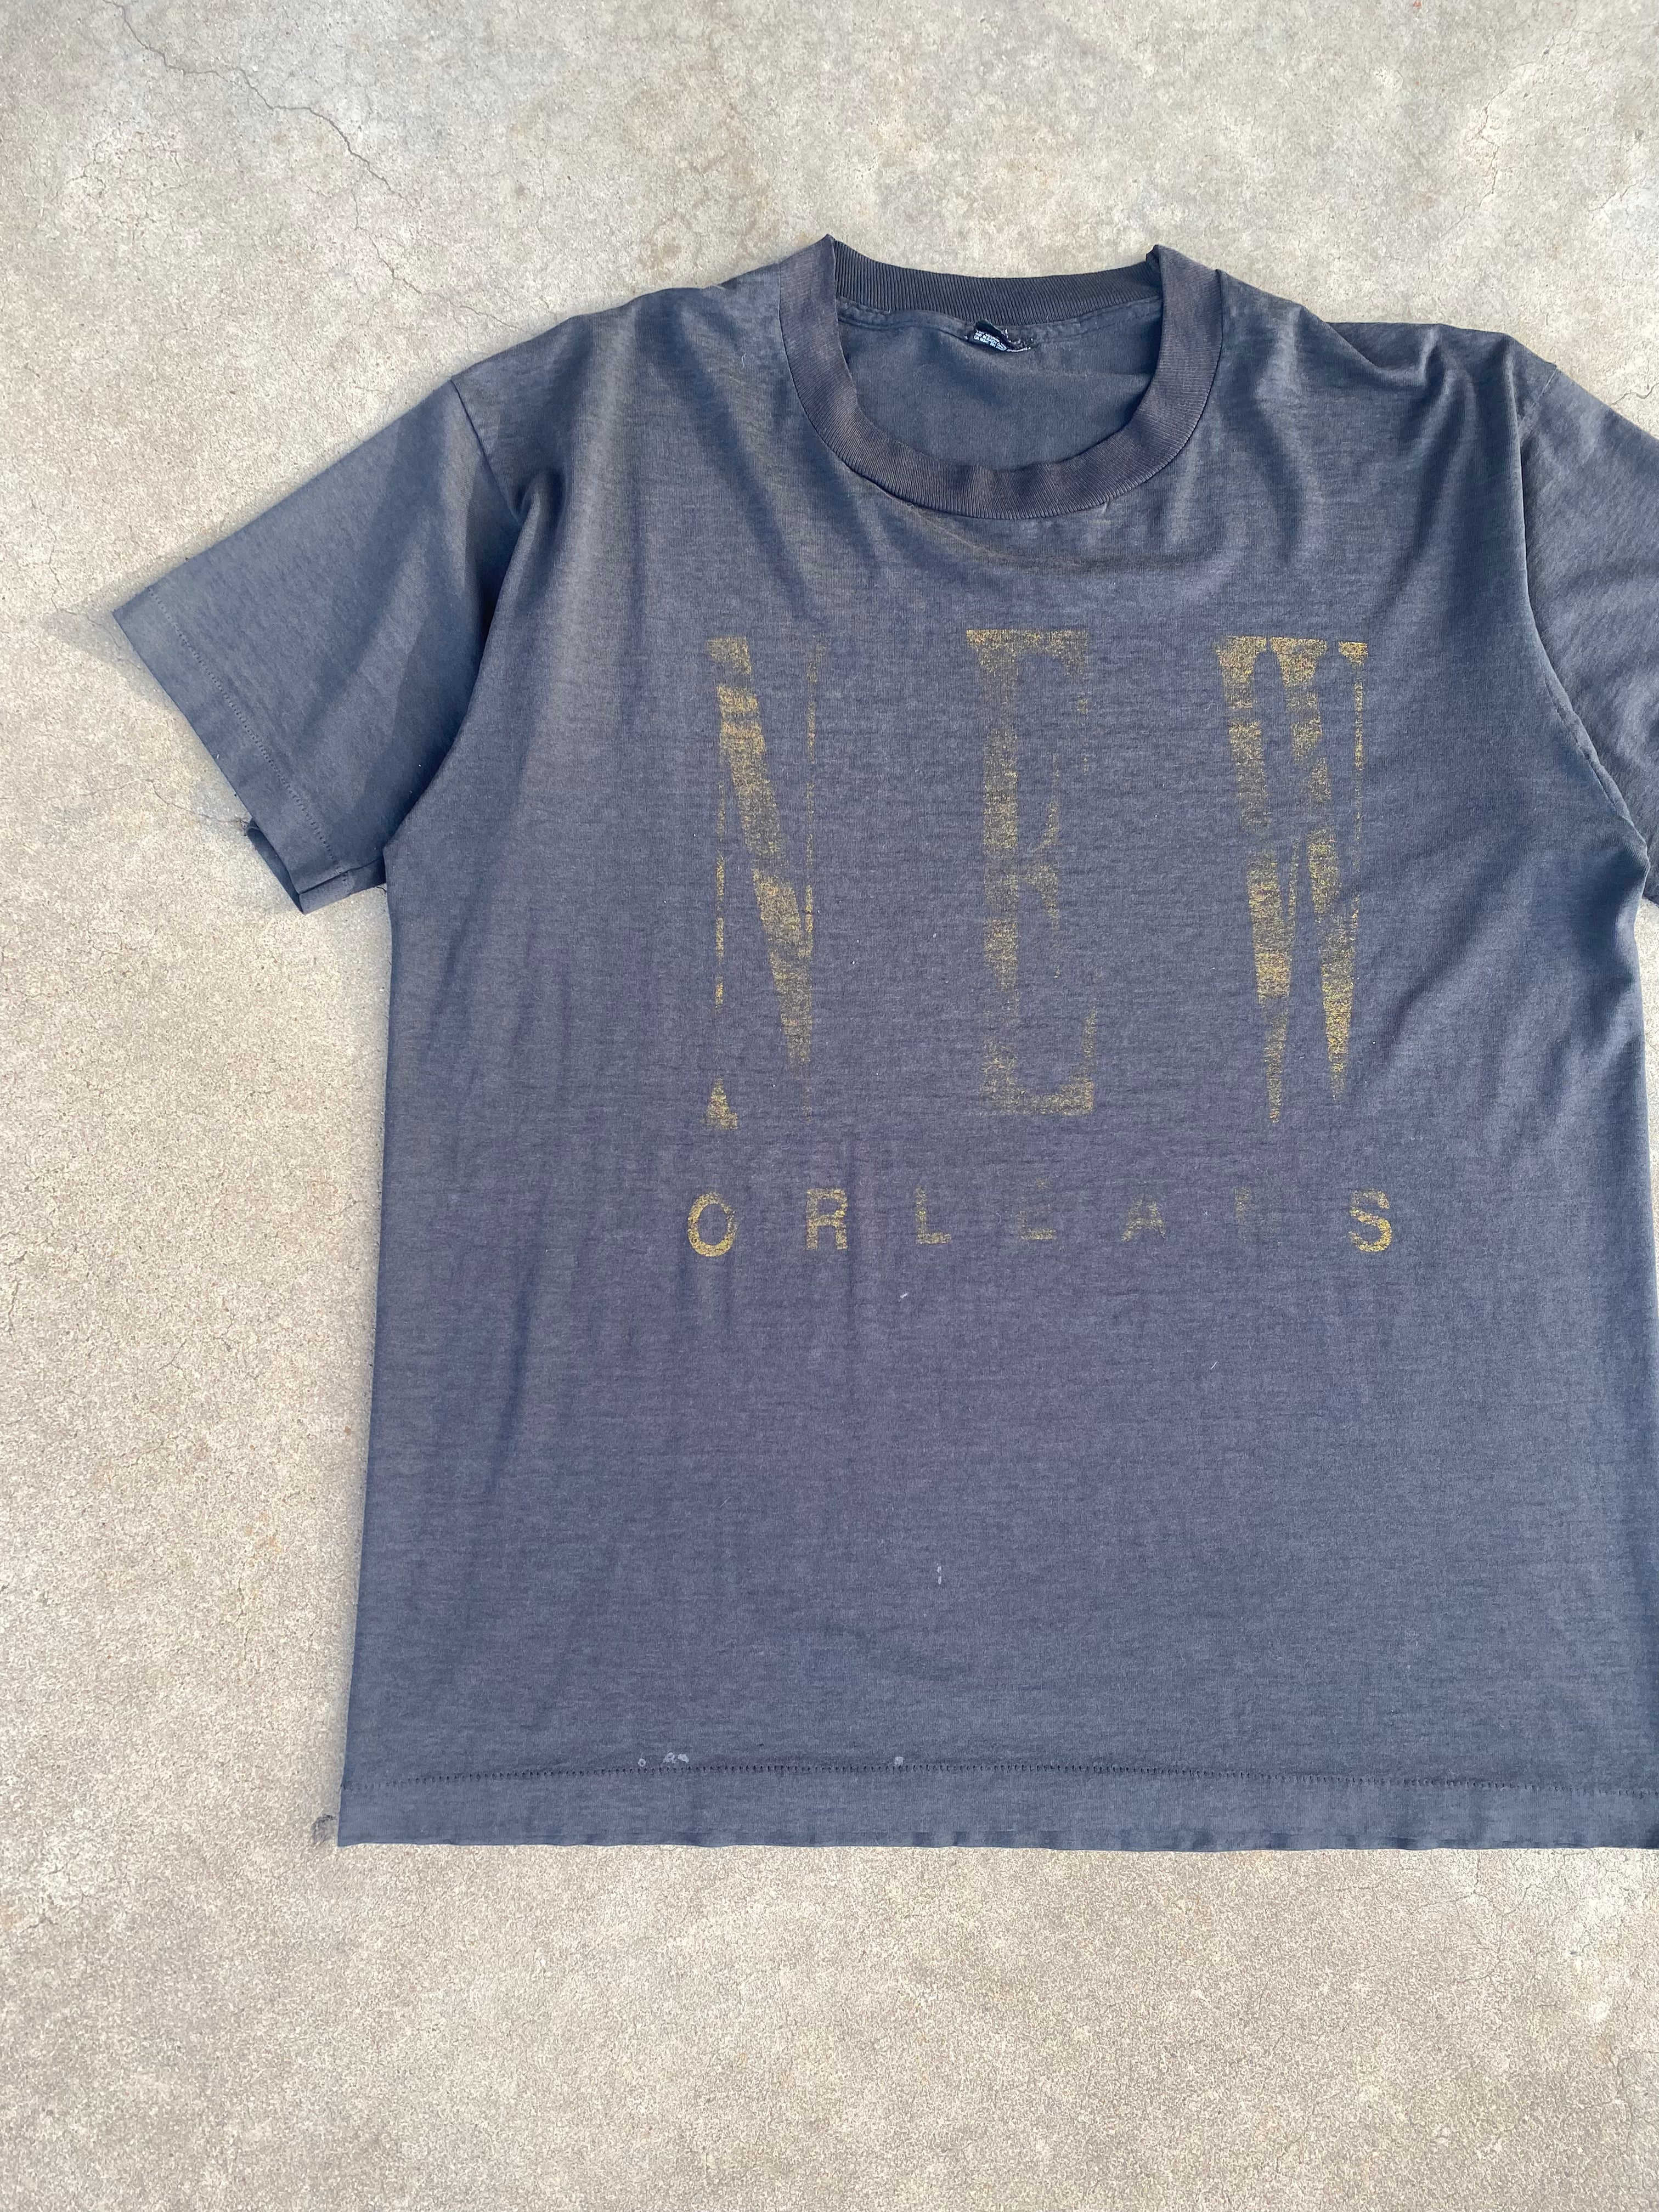 1990s New Orleans Faded T-Shirt (L)